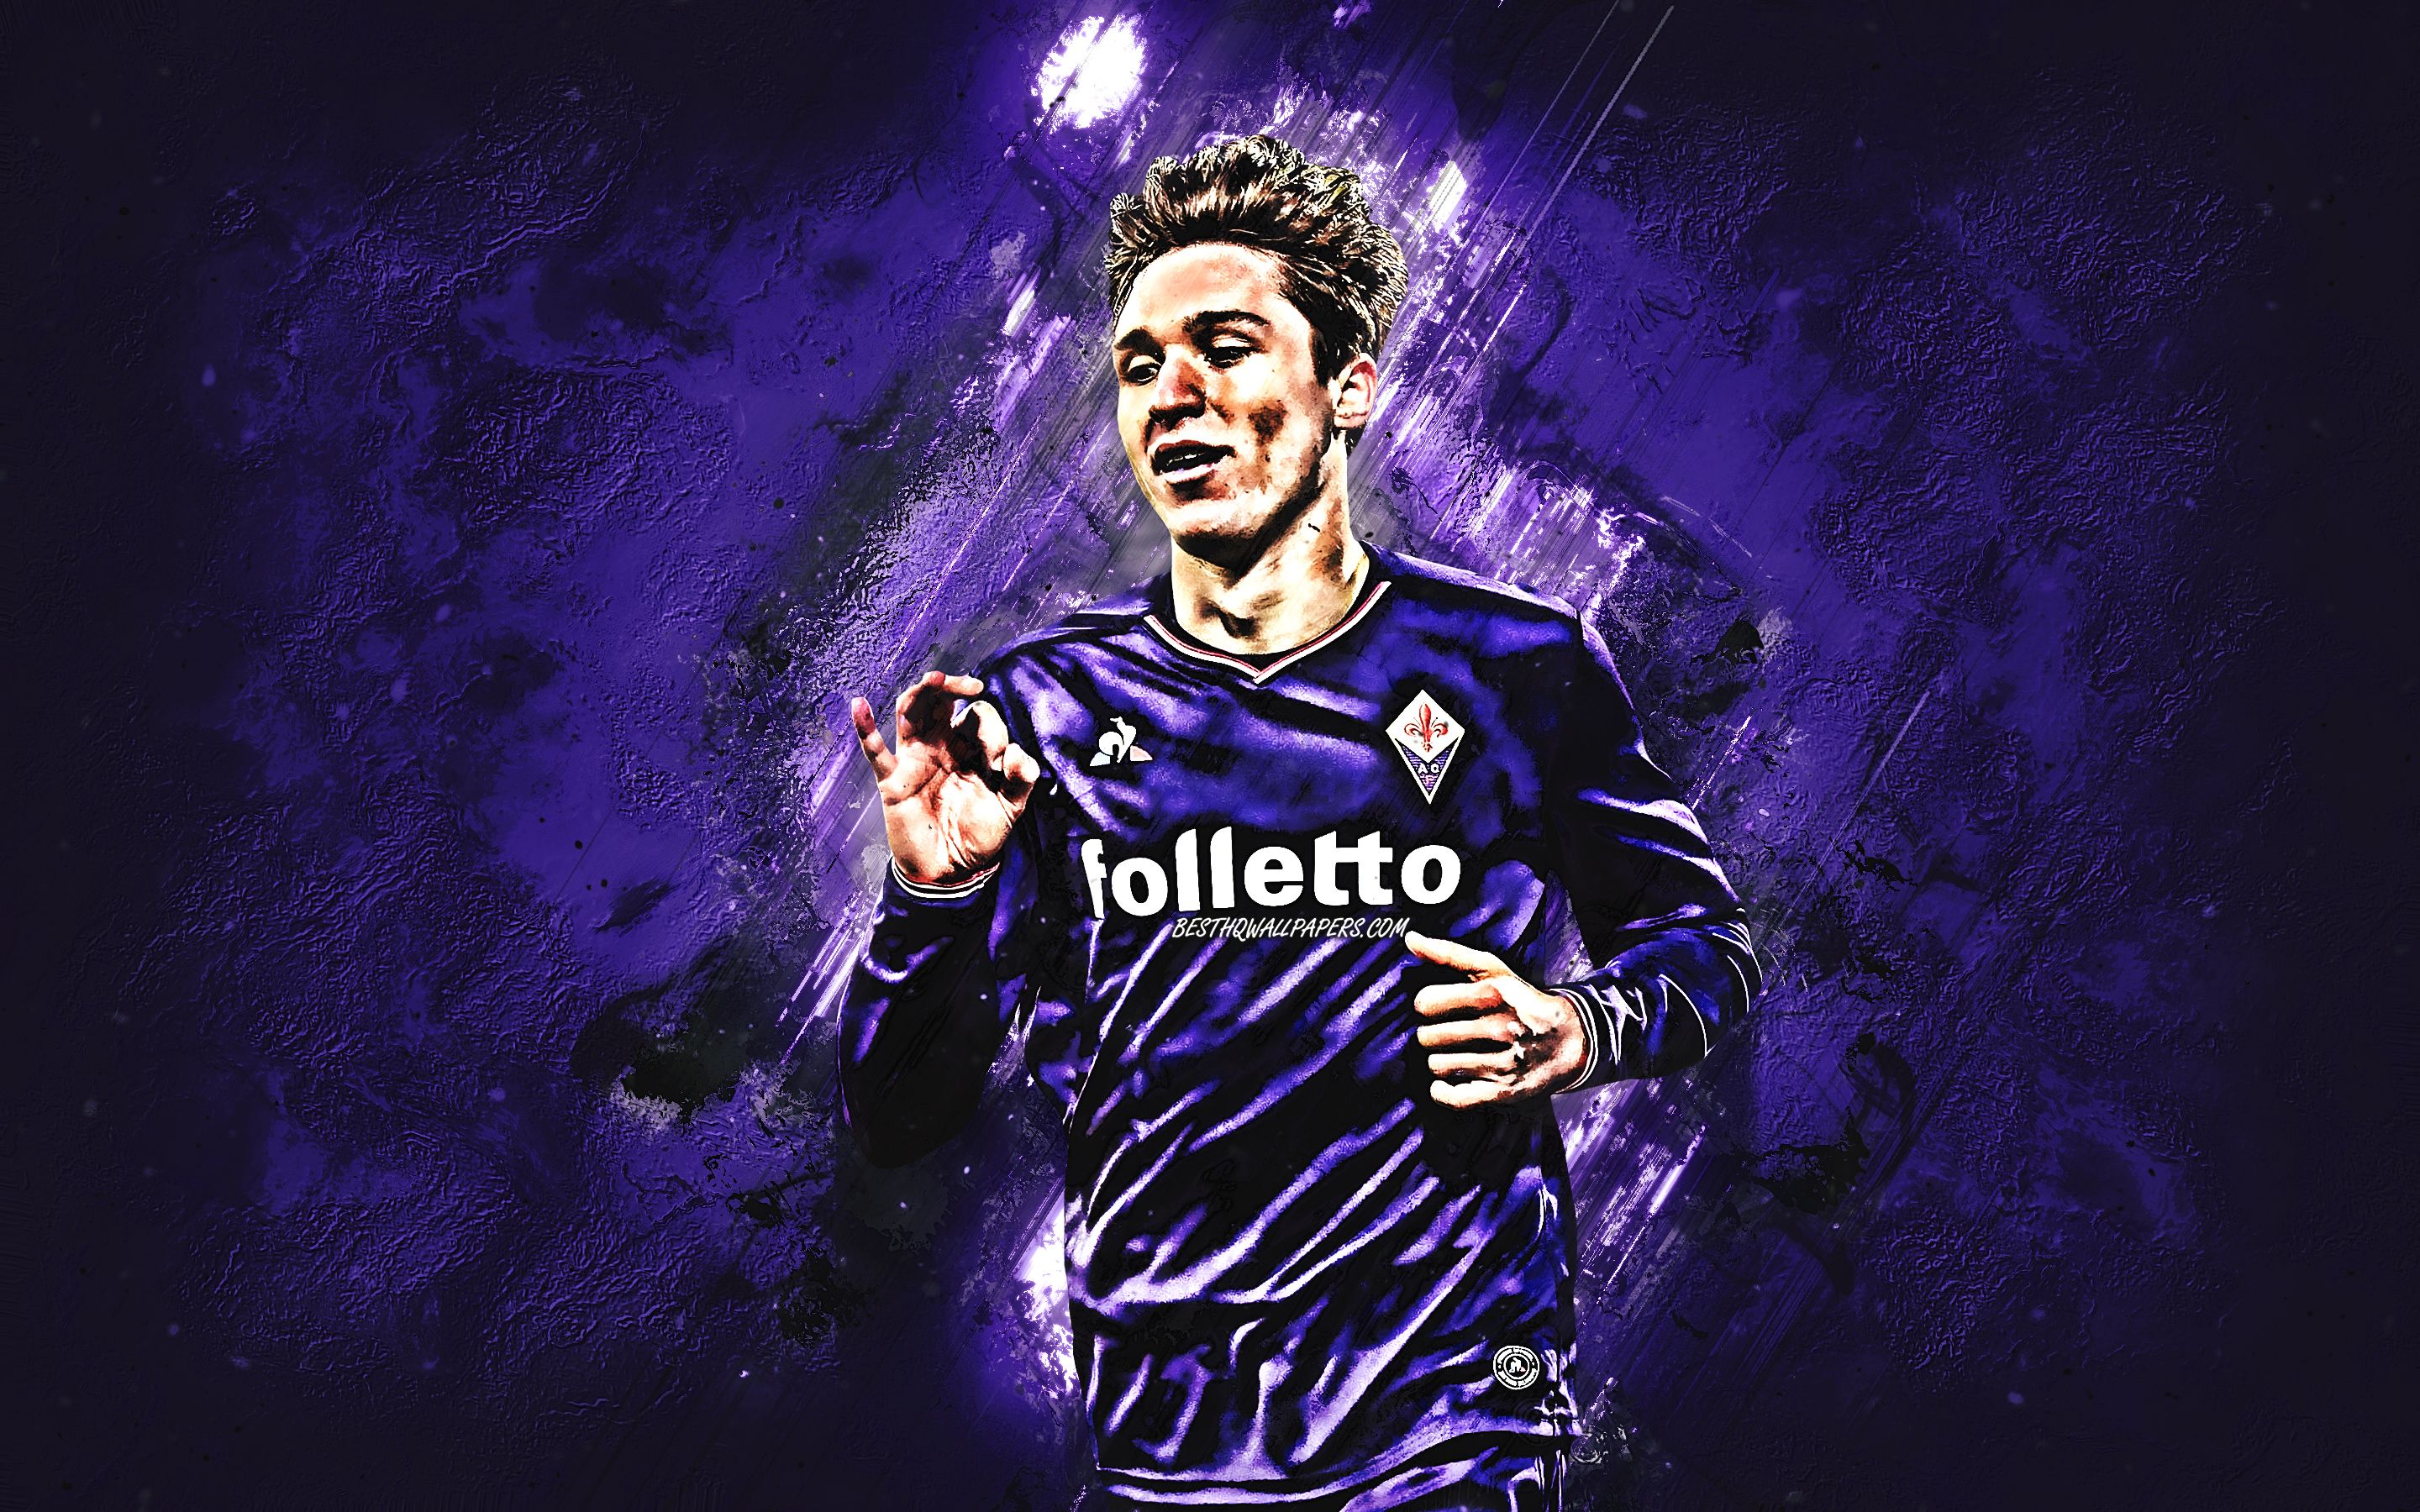 Download wallpaper Federico Chiesa, ACF Fiorentina, striker, joy, goal, purple stone, portrait, famous footballers, football, Italian footballers, grunge, Serie A, Italy, Chiesa, Fiorentina for desktop with resolution 2880x1800. High Quality HD picture